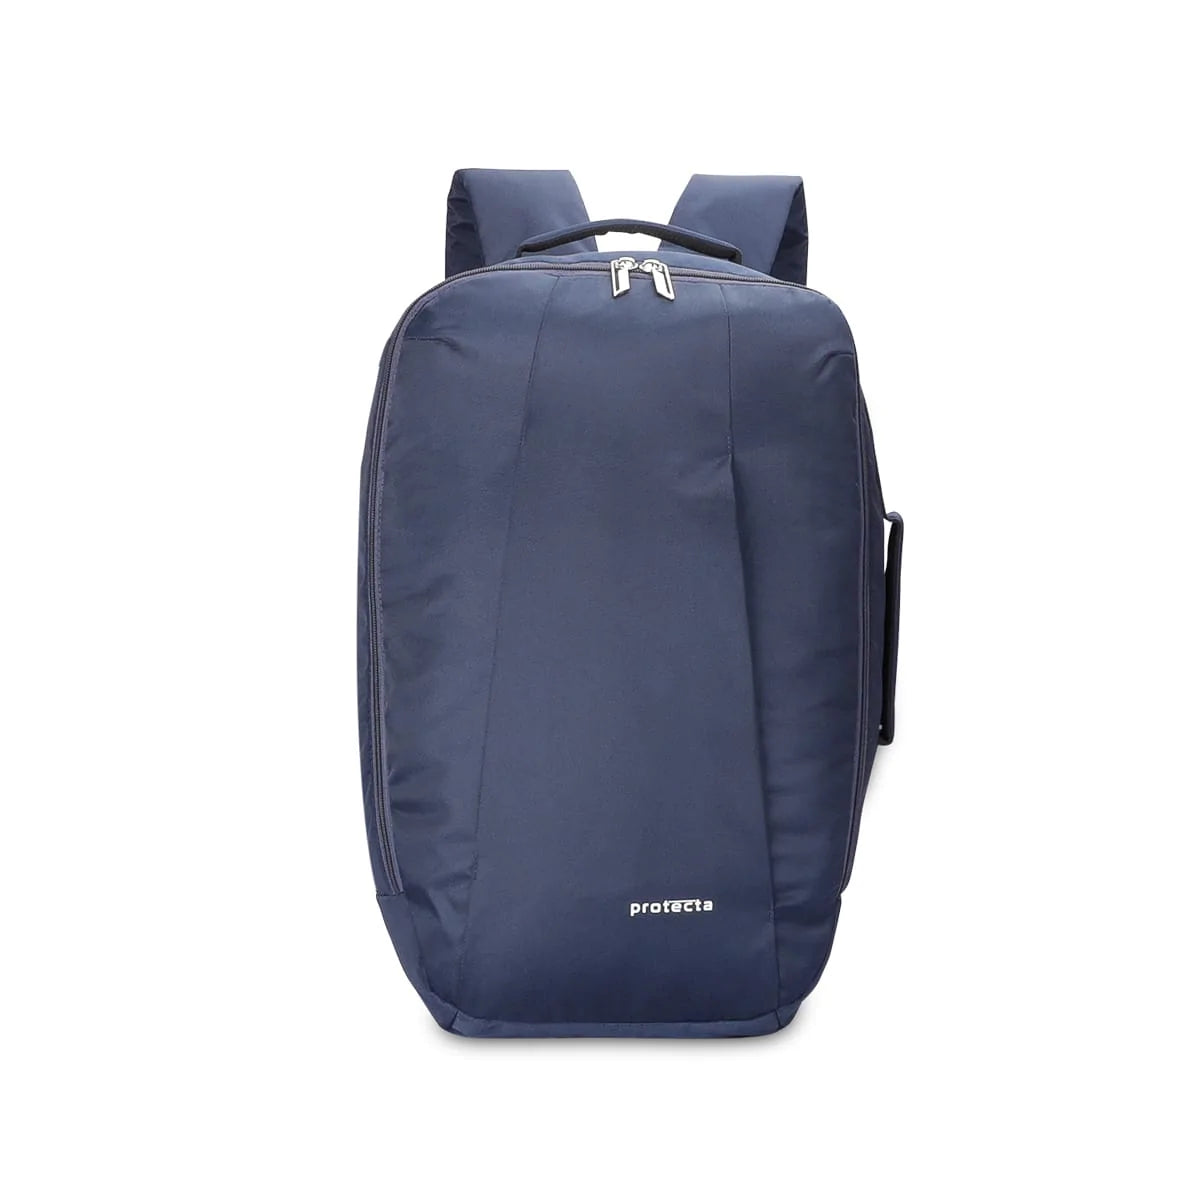 Navy | Protecta Proposed Merger Convertible Office Trave Laptop Backpack-Main